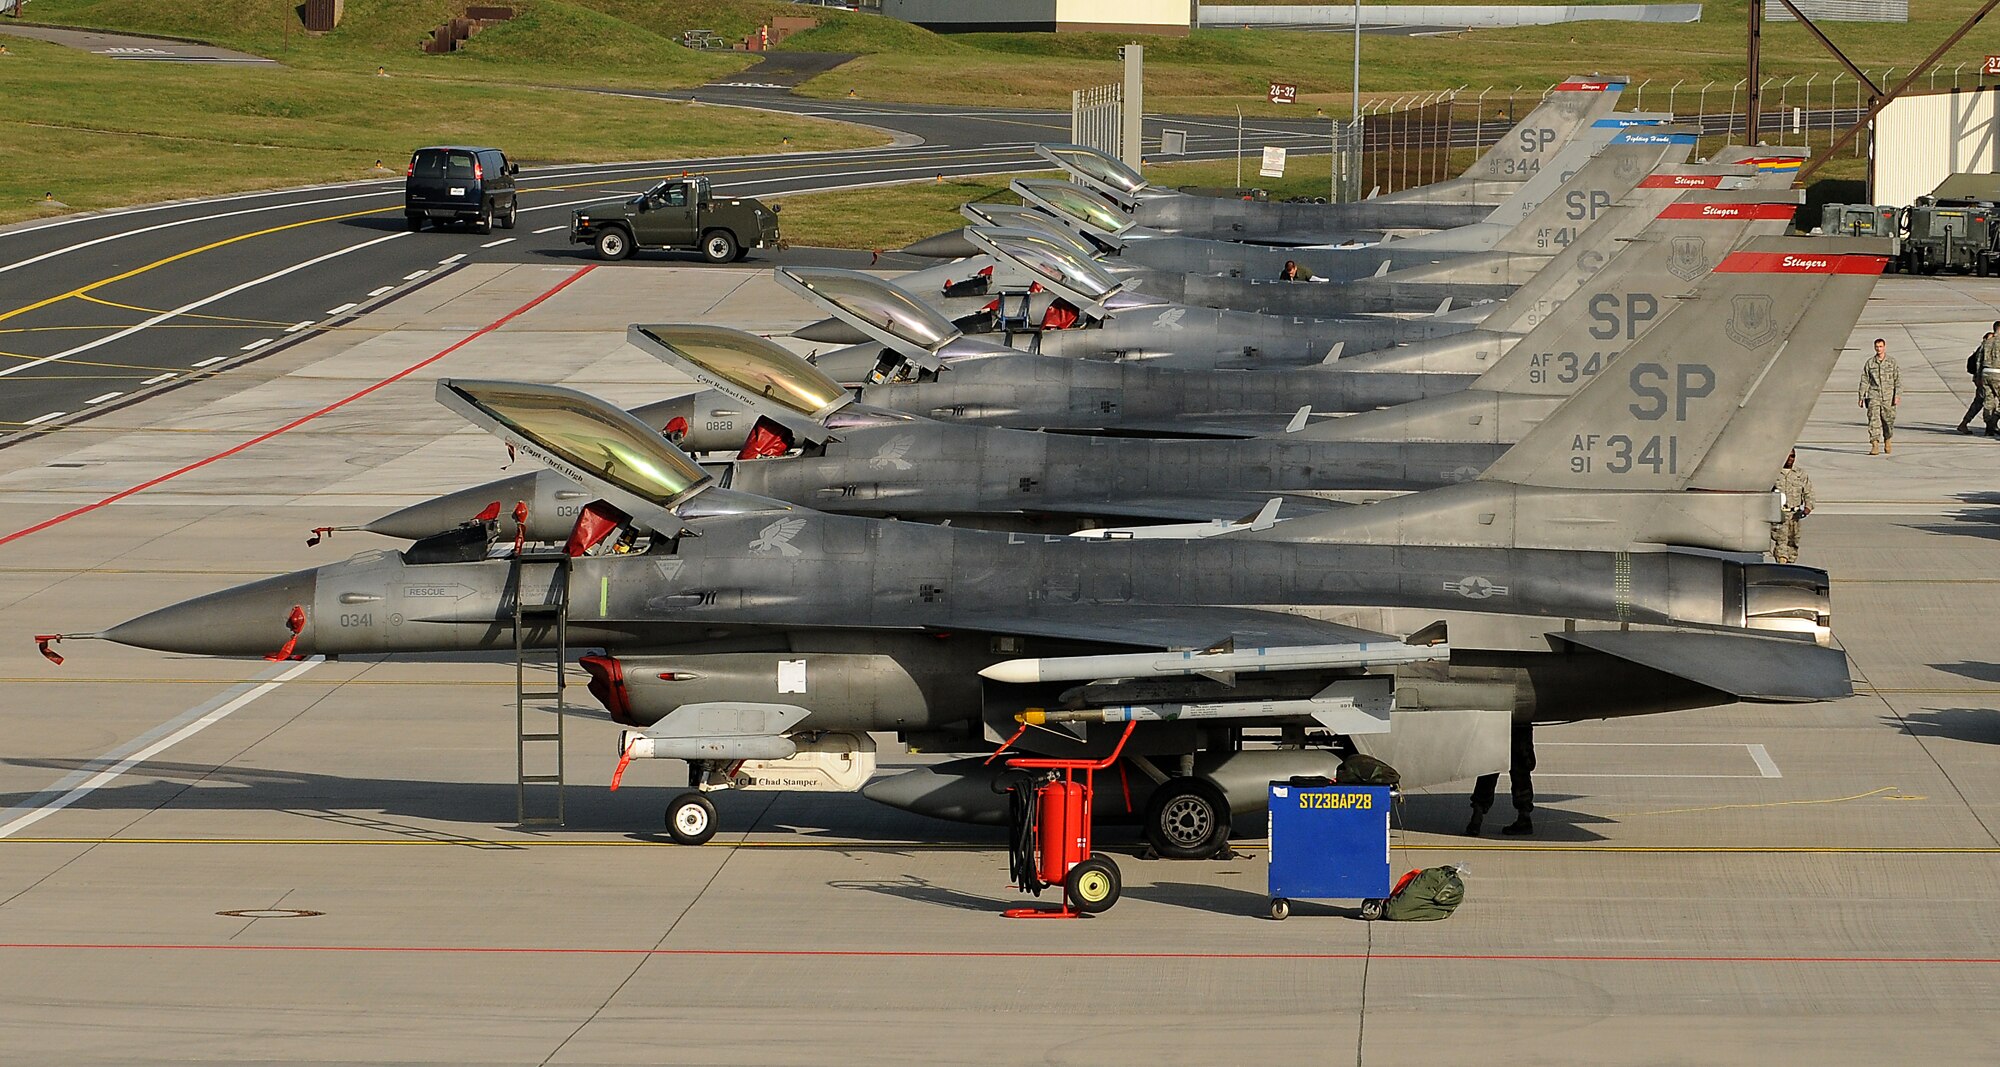 SPANGDAHLEM AIR BASE, Germany -- F-16 Fighting Falcons from the 22nd Fighter Squadron line a ramp Nov. 20 here. The 22nd and 81st Fighter Squadrons participated in Operation Saber Crown 10-02, which tested the 52nd Fighter Wing’s capabilities to operate during a real-world contingency. (U.S. Air Force photo/Airman 1st Class Nathanael Callon)